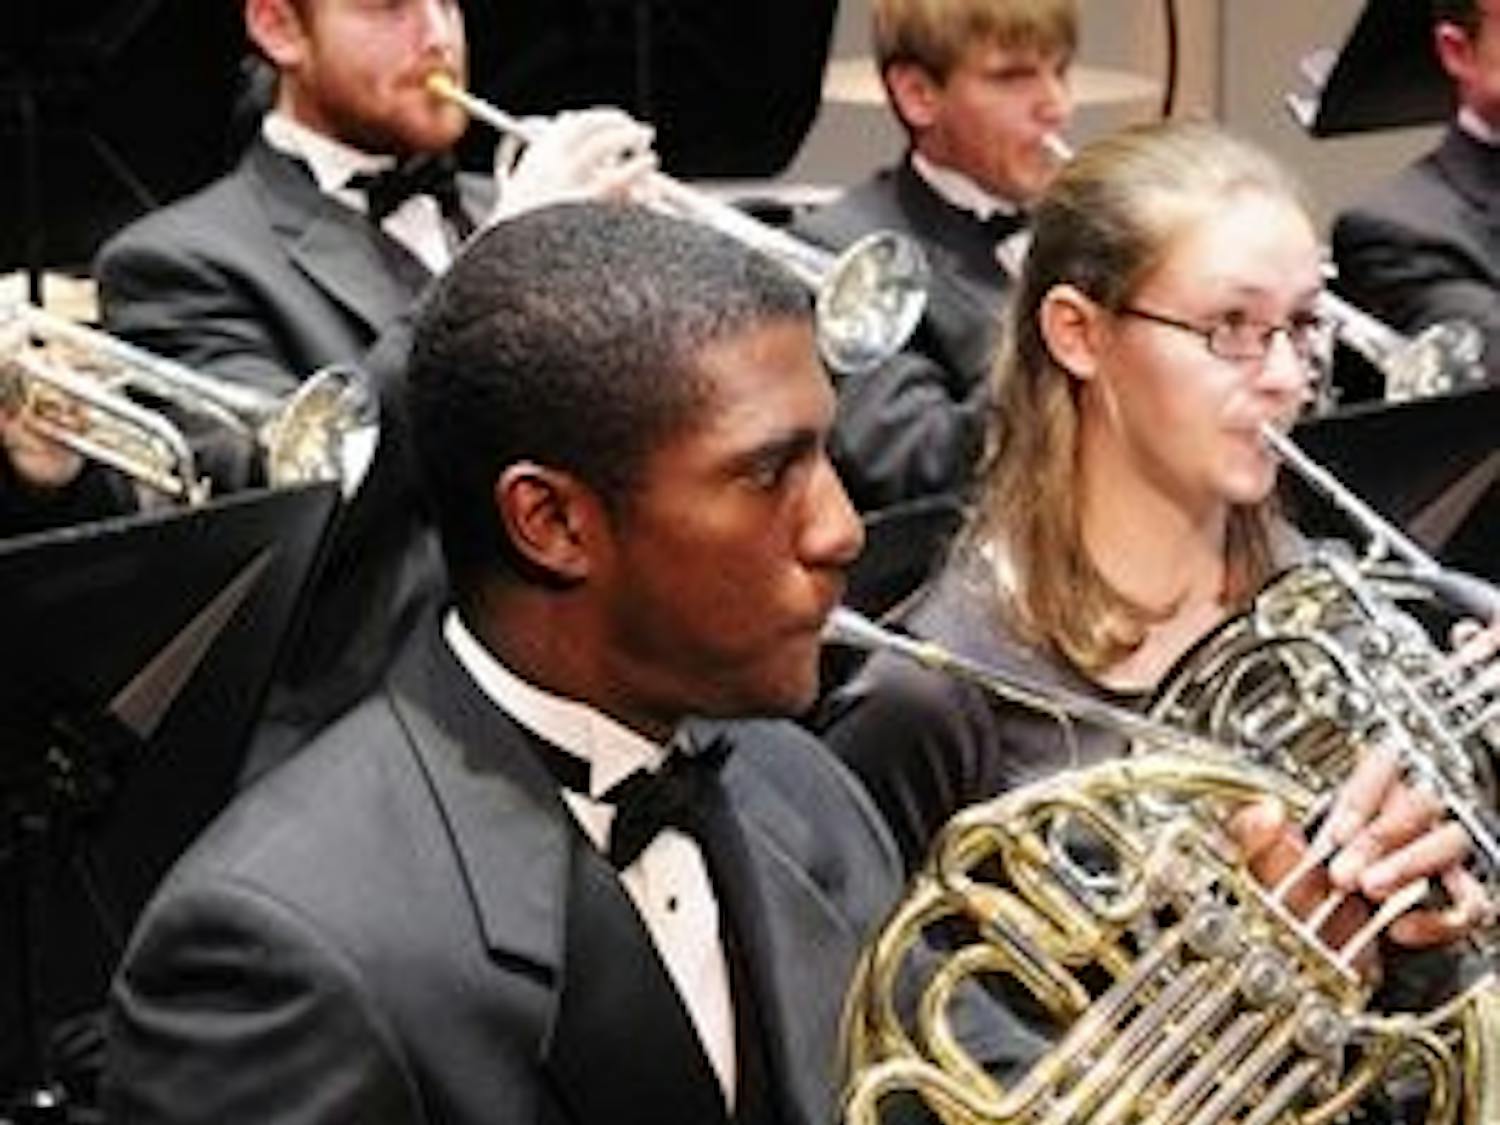 Daniel Johnson, member of The Auburn University Band, plays his french horn during the benefit concert in memory of Sarah Anderson.